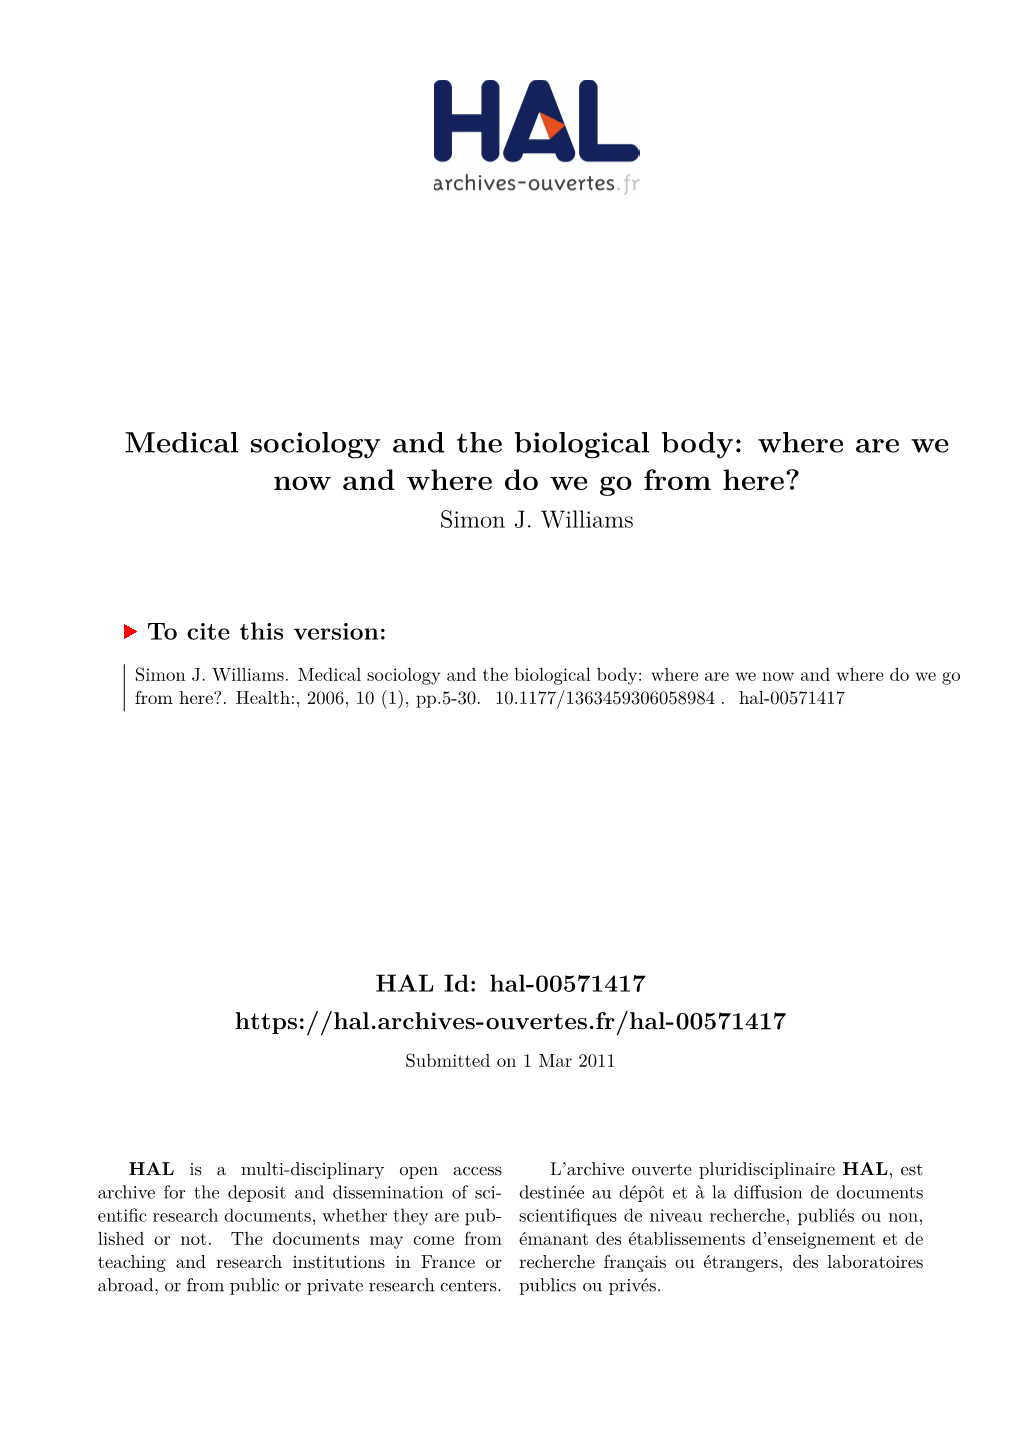 Medical Sociology and the Biological Body: Where Are We Now and Where Do We Go from Here? Simon J